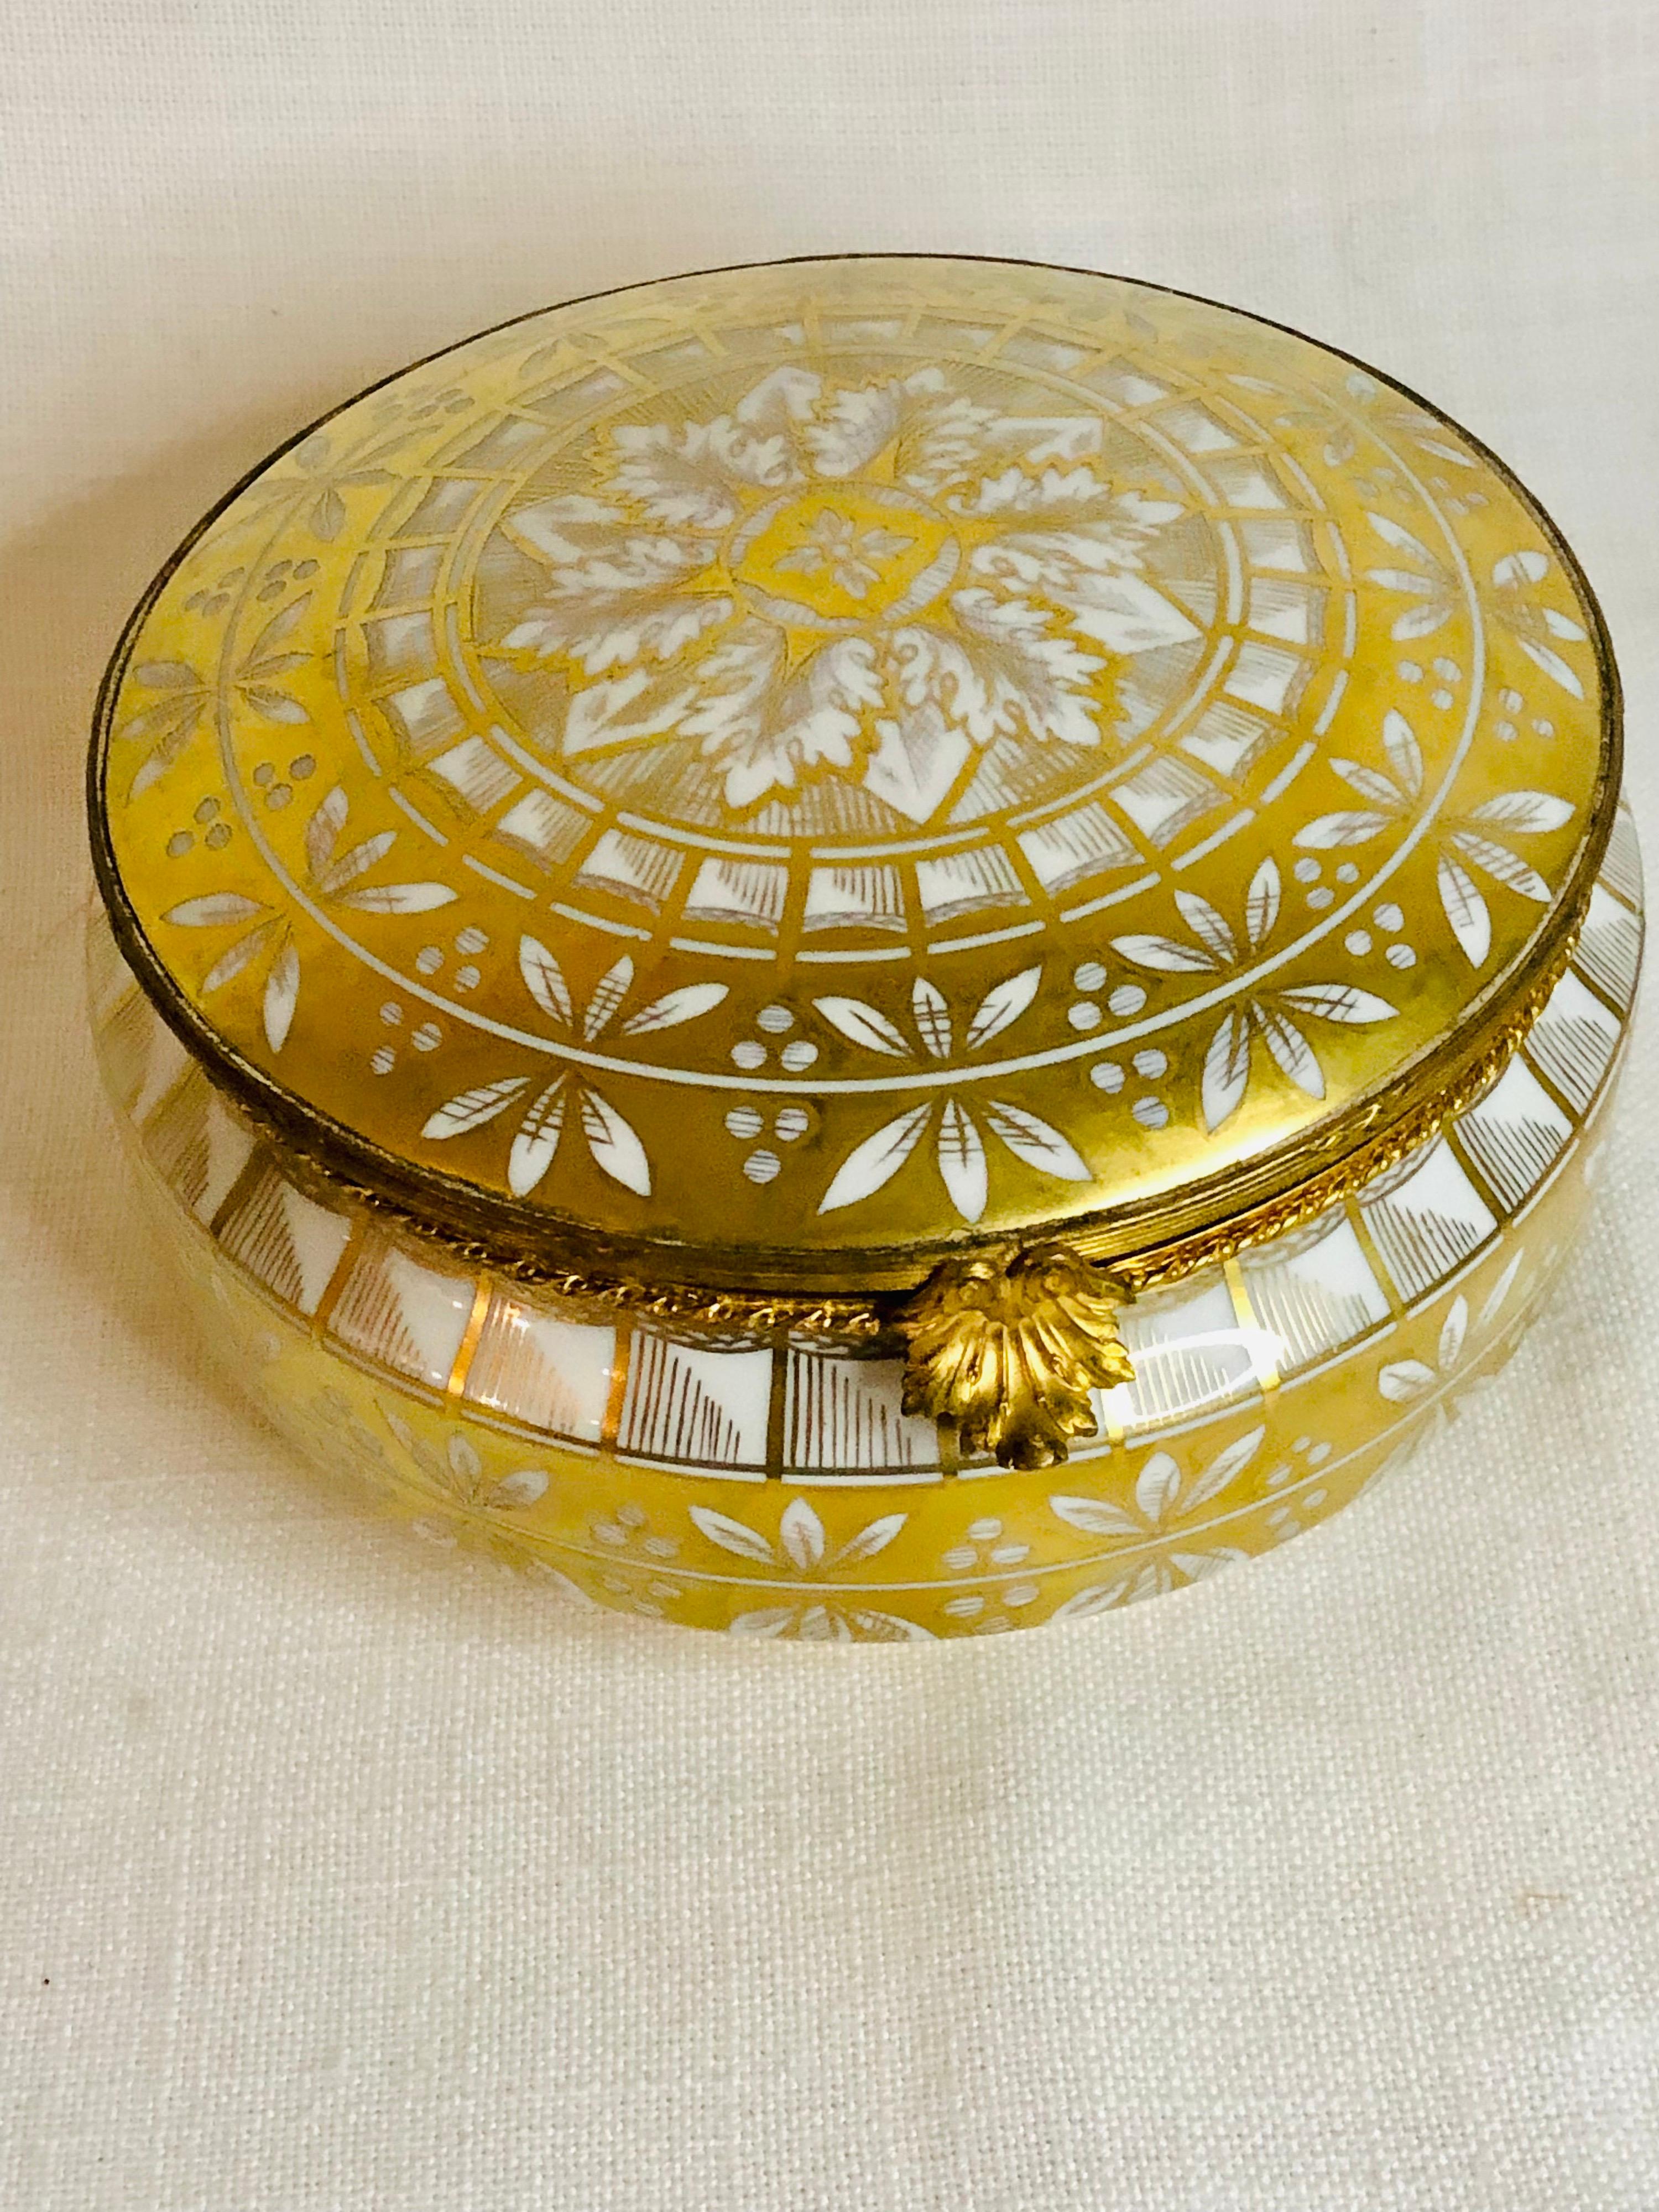 Le Tallec Porcelain Box with Gold Painted Decoration on a White Porcelain Ground 3